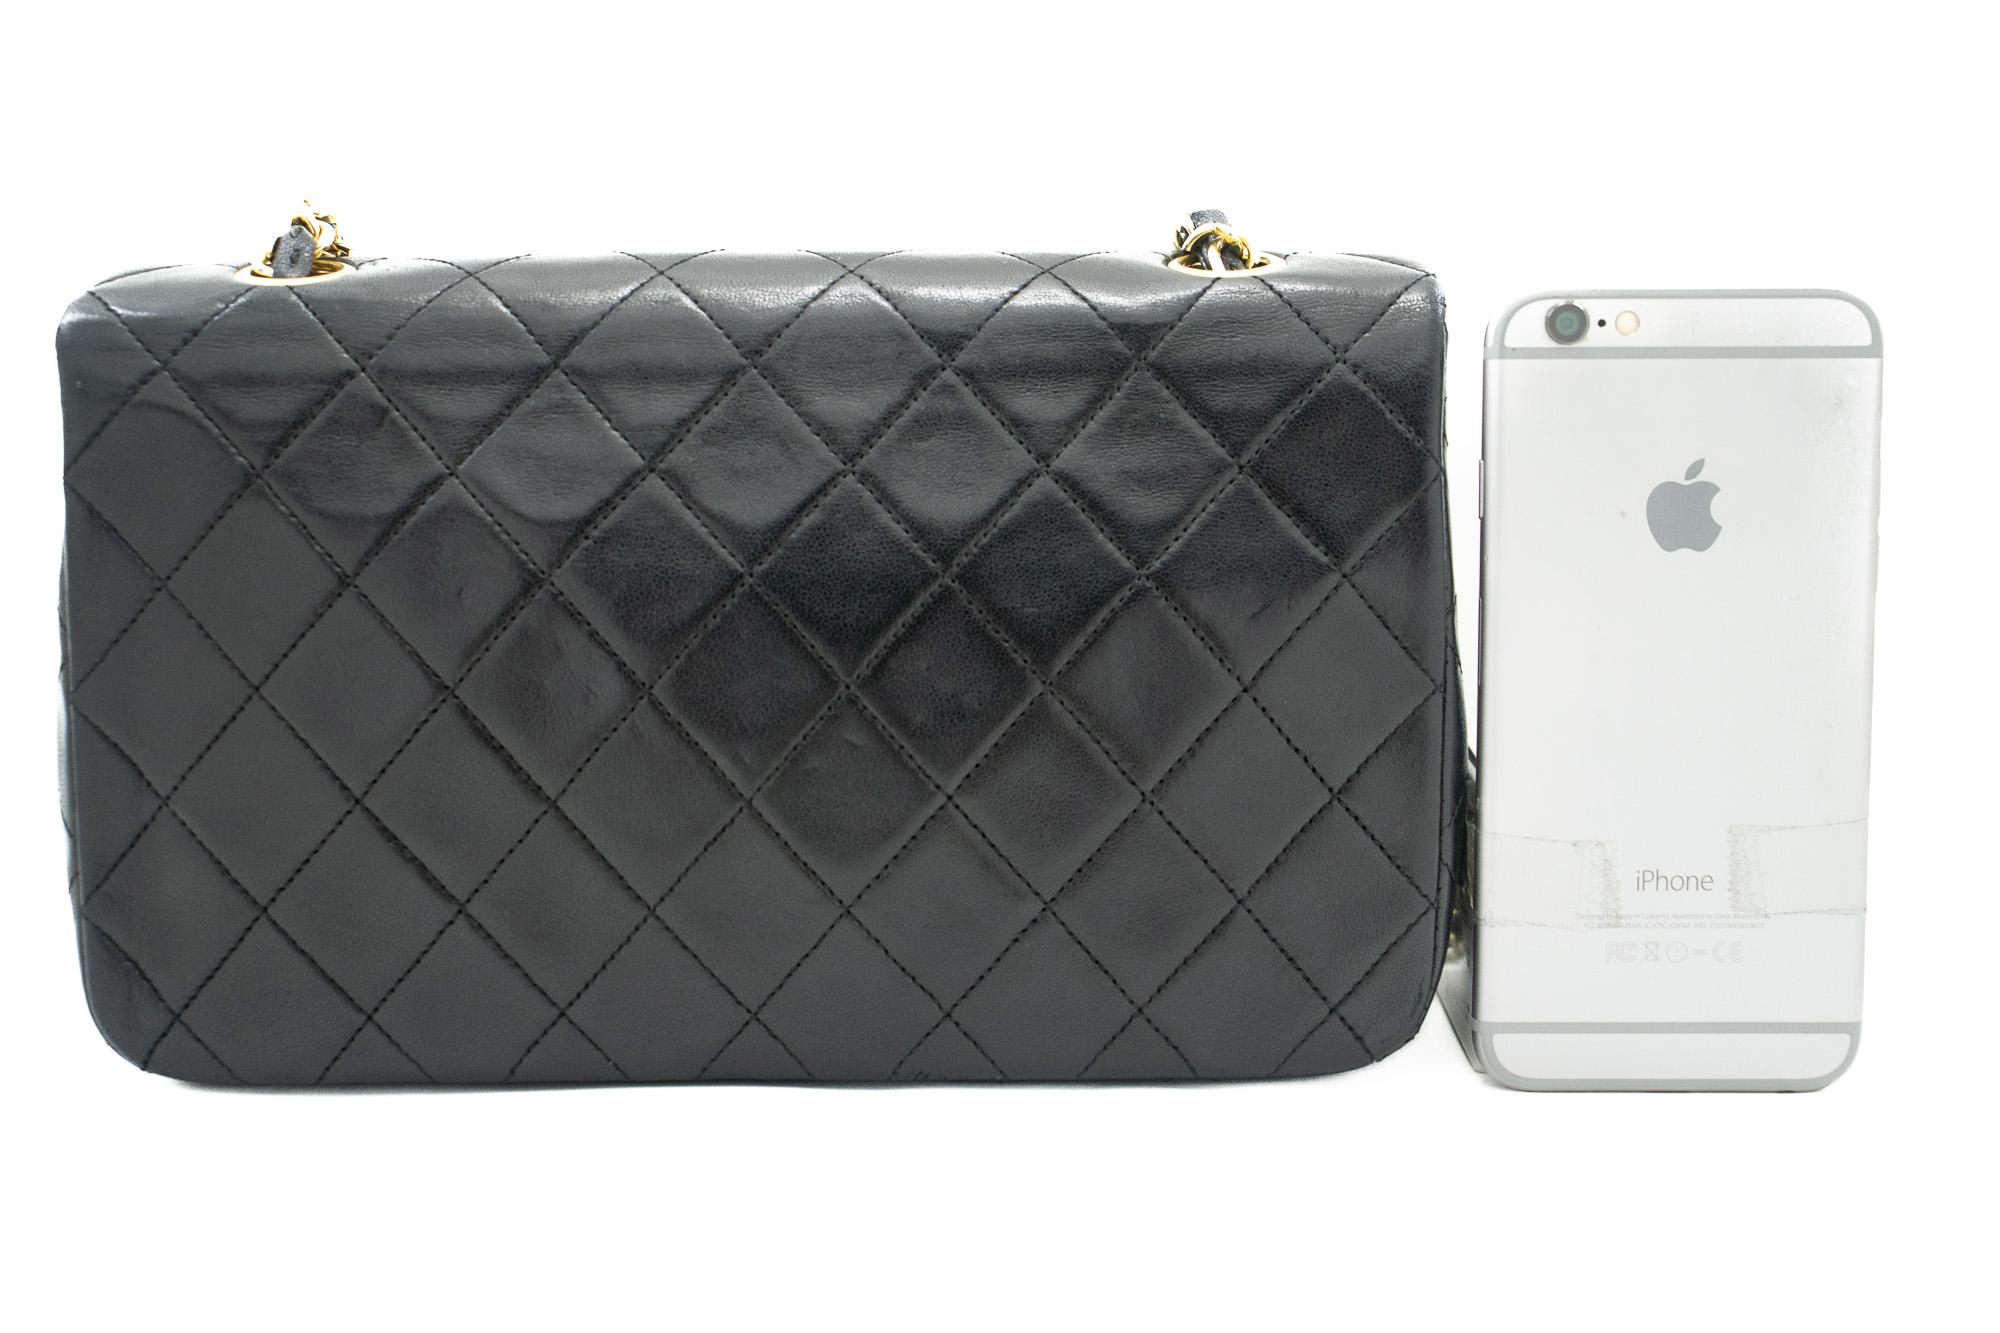 CHANEL Full Chain Flap Shoulder Bag Black Quilted Purse Lambskin In Good Condition For Sale In Takamatsu-shi, JP